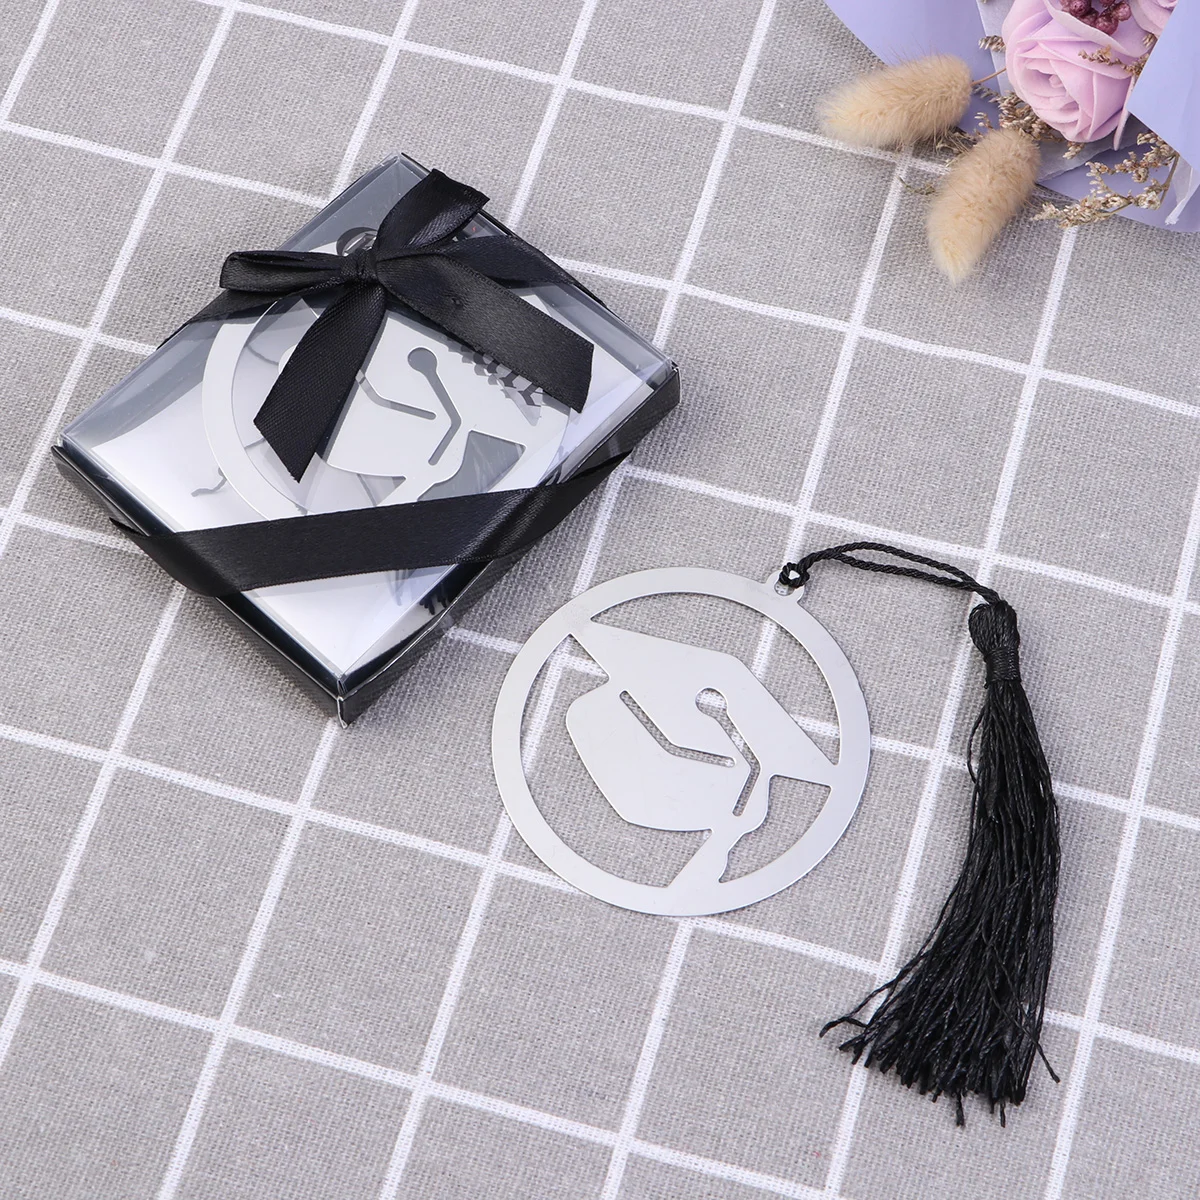 

Bookmarks Doctoral Shaped Graduation Gifts Page Markers with Black Tassel for Students Read Lovers Writers